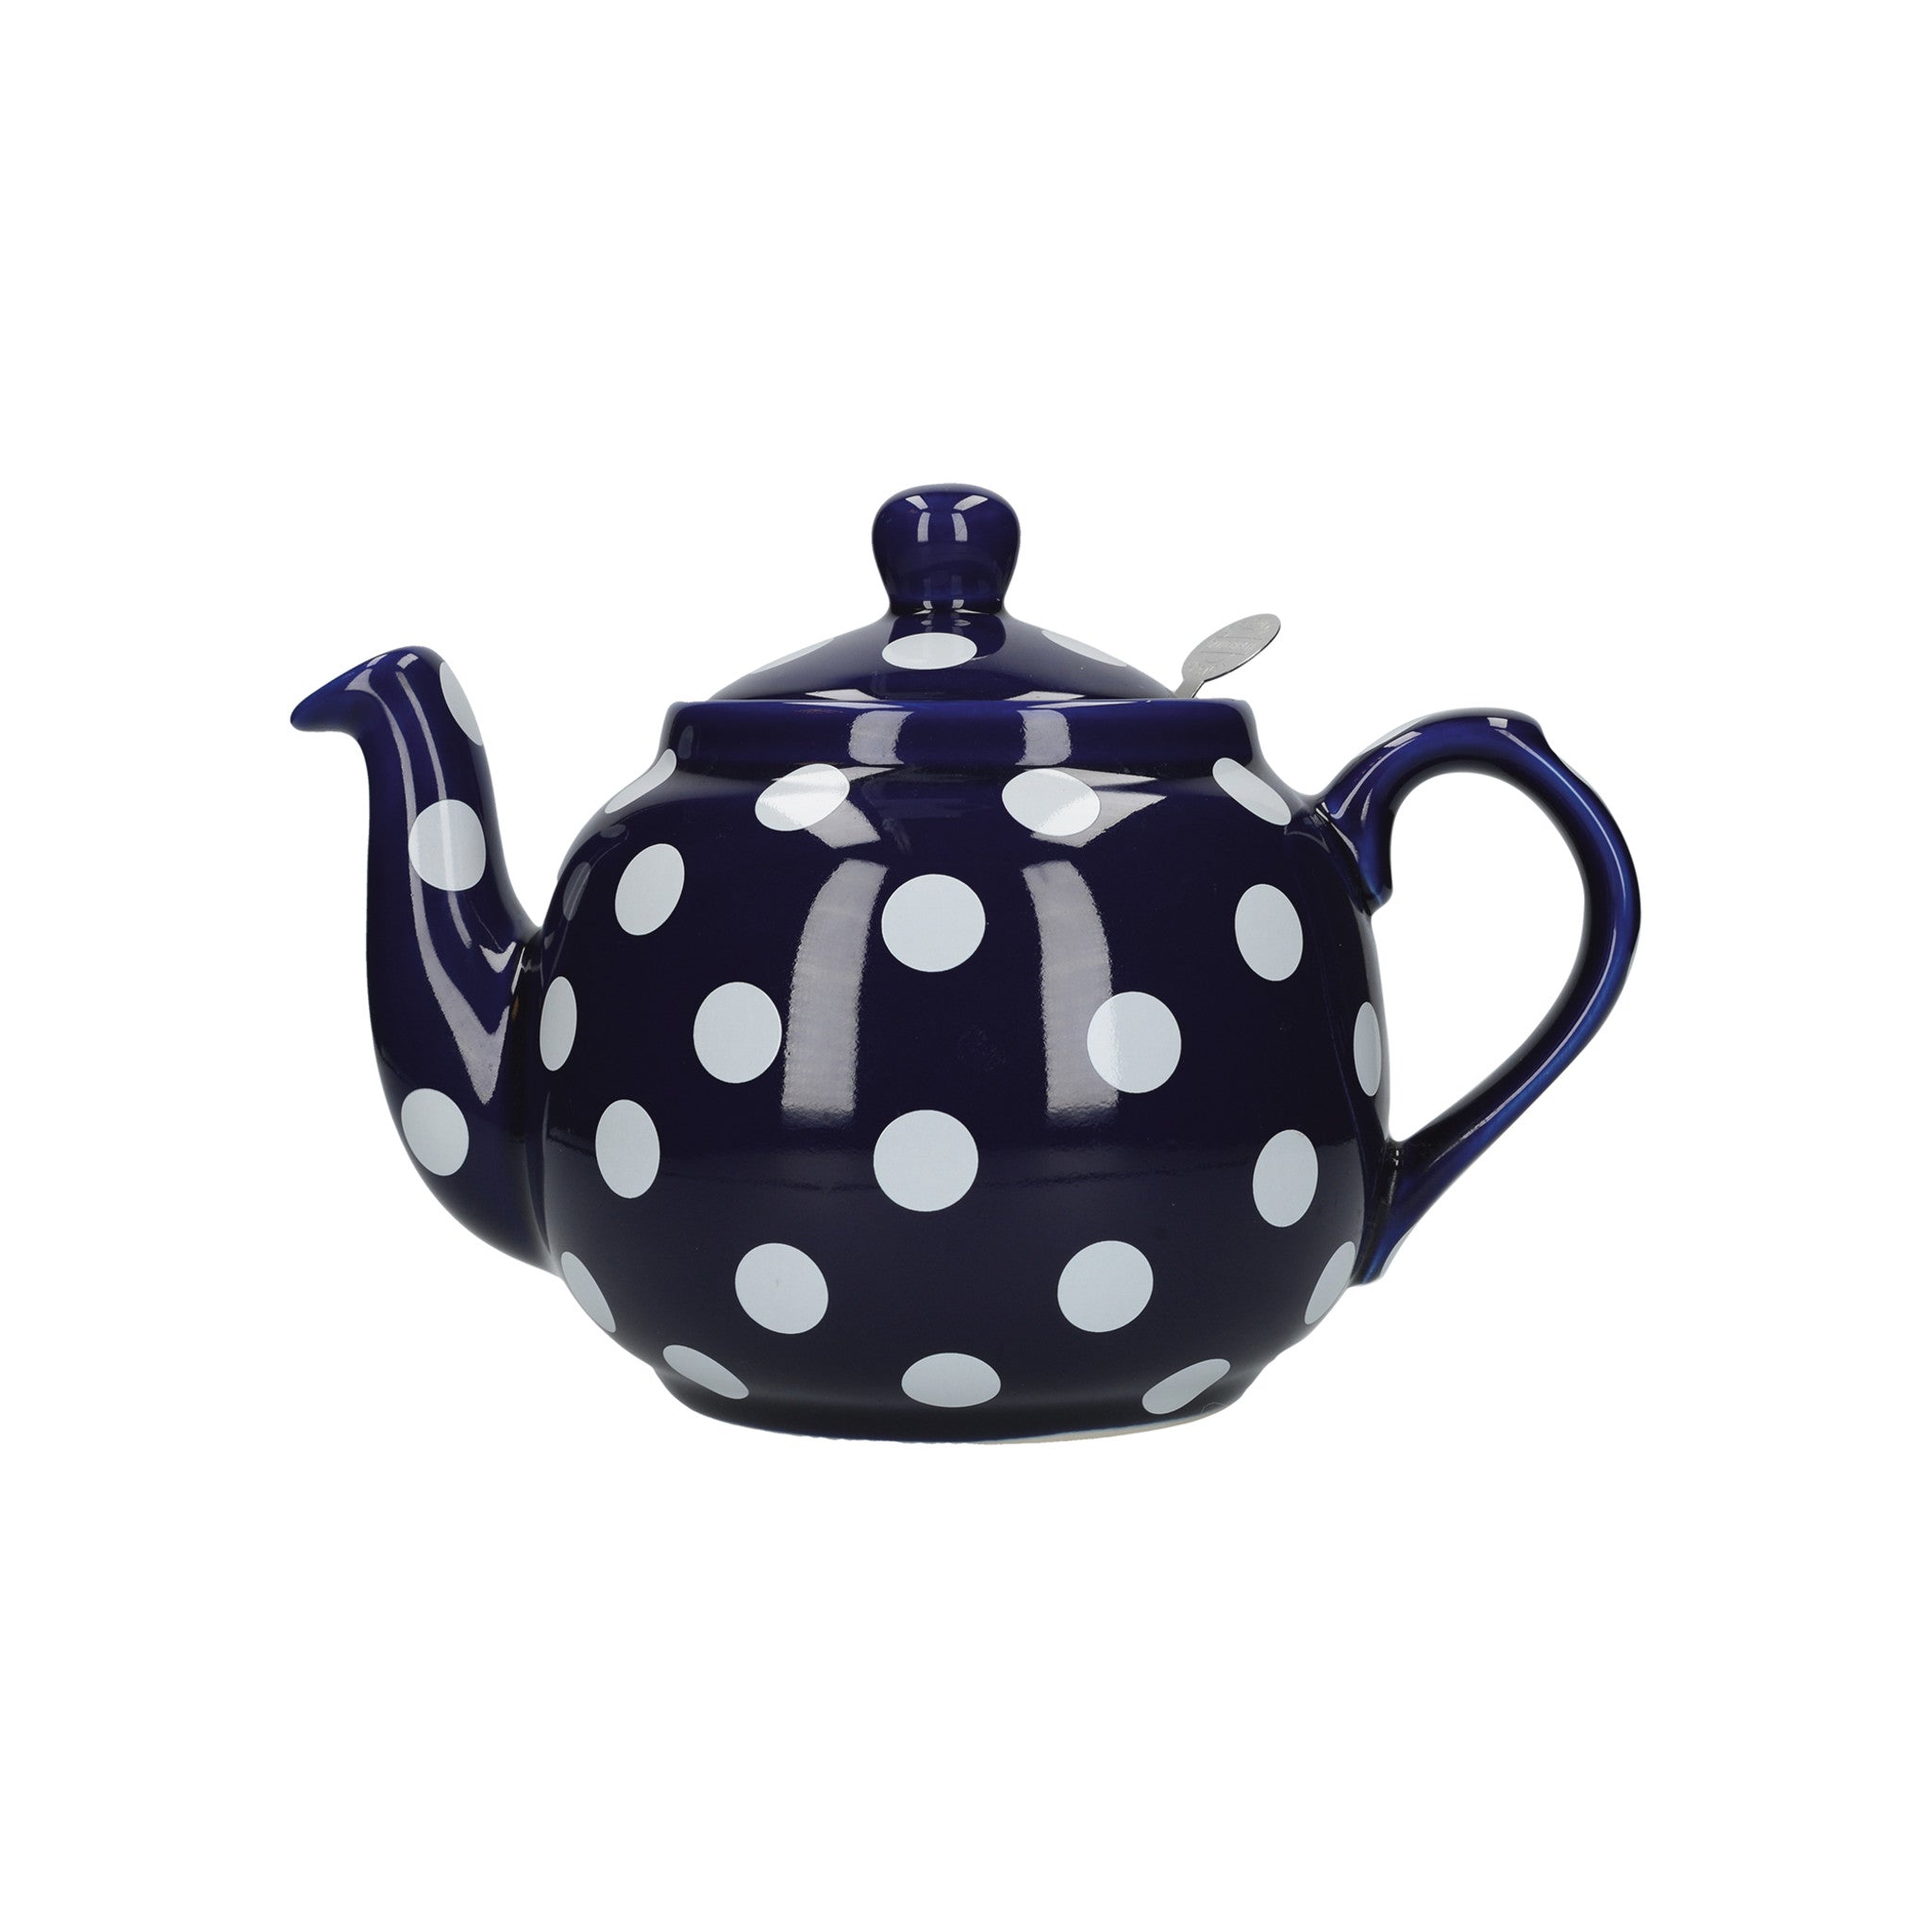 London Pottery Farmhouse 4 Cup Teapot Blue With White Spots – CookServeEnjoy